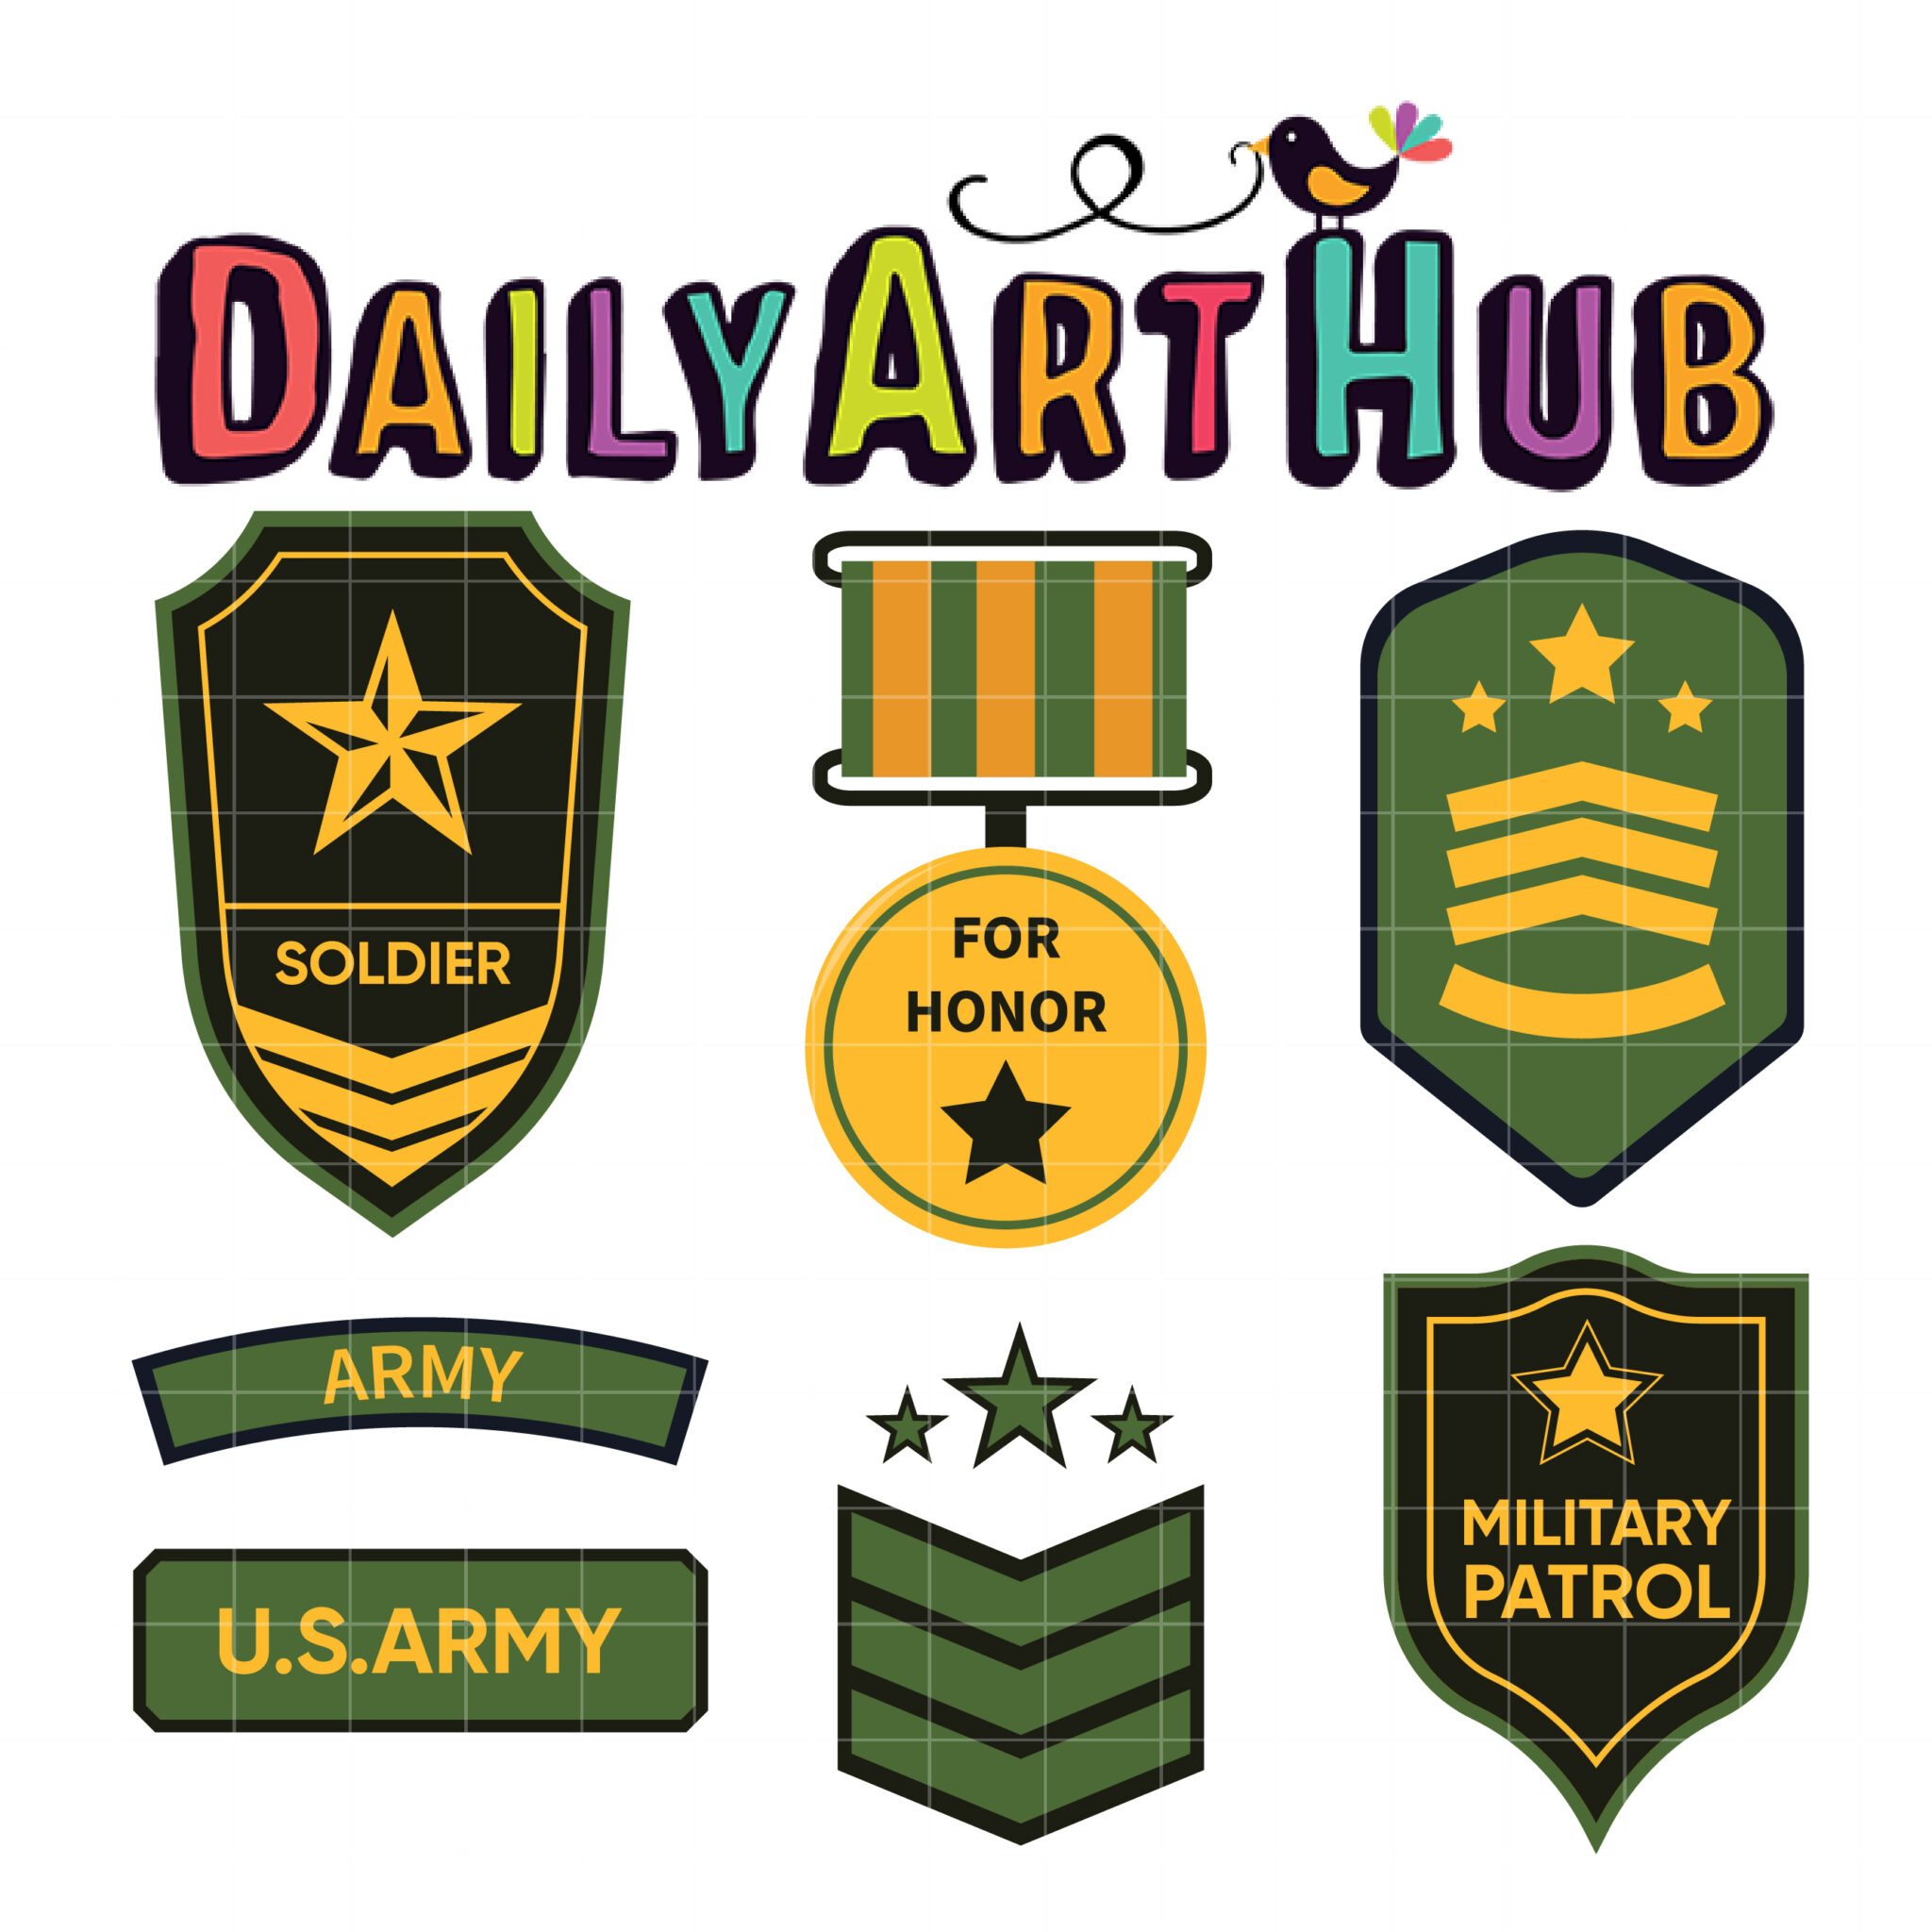 Army Soldier Badge Clip Art Set – Daily Art Hub // Graphics